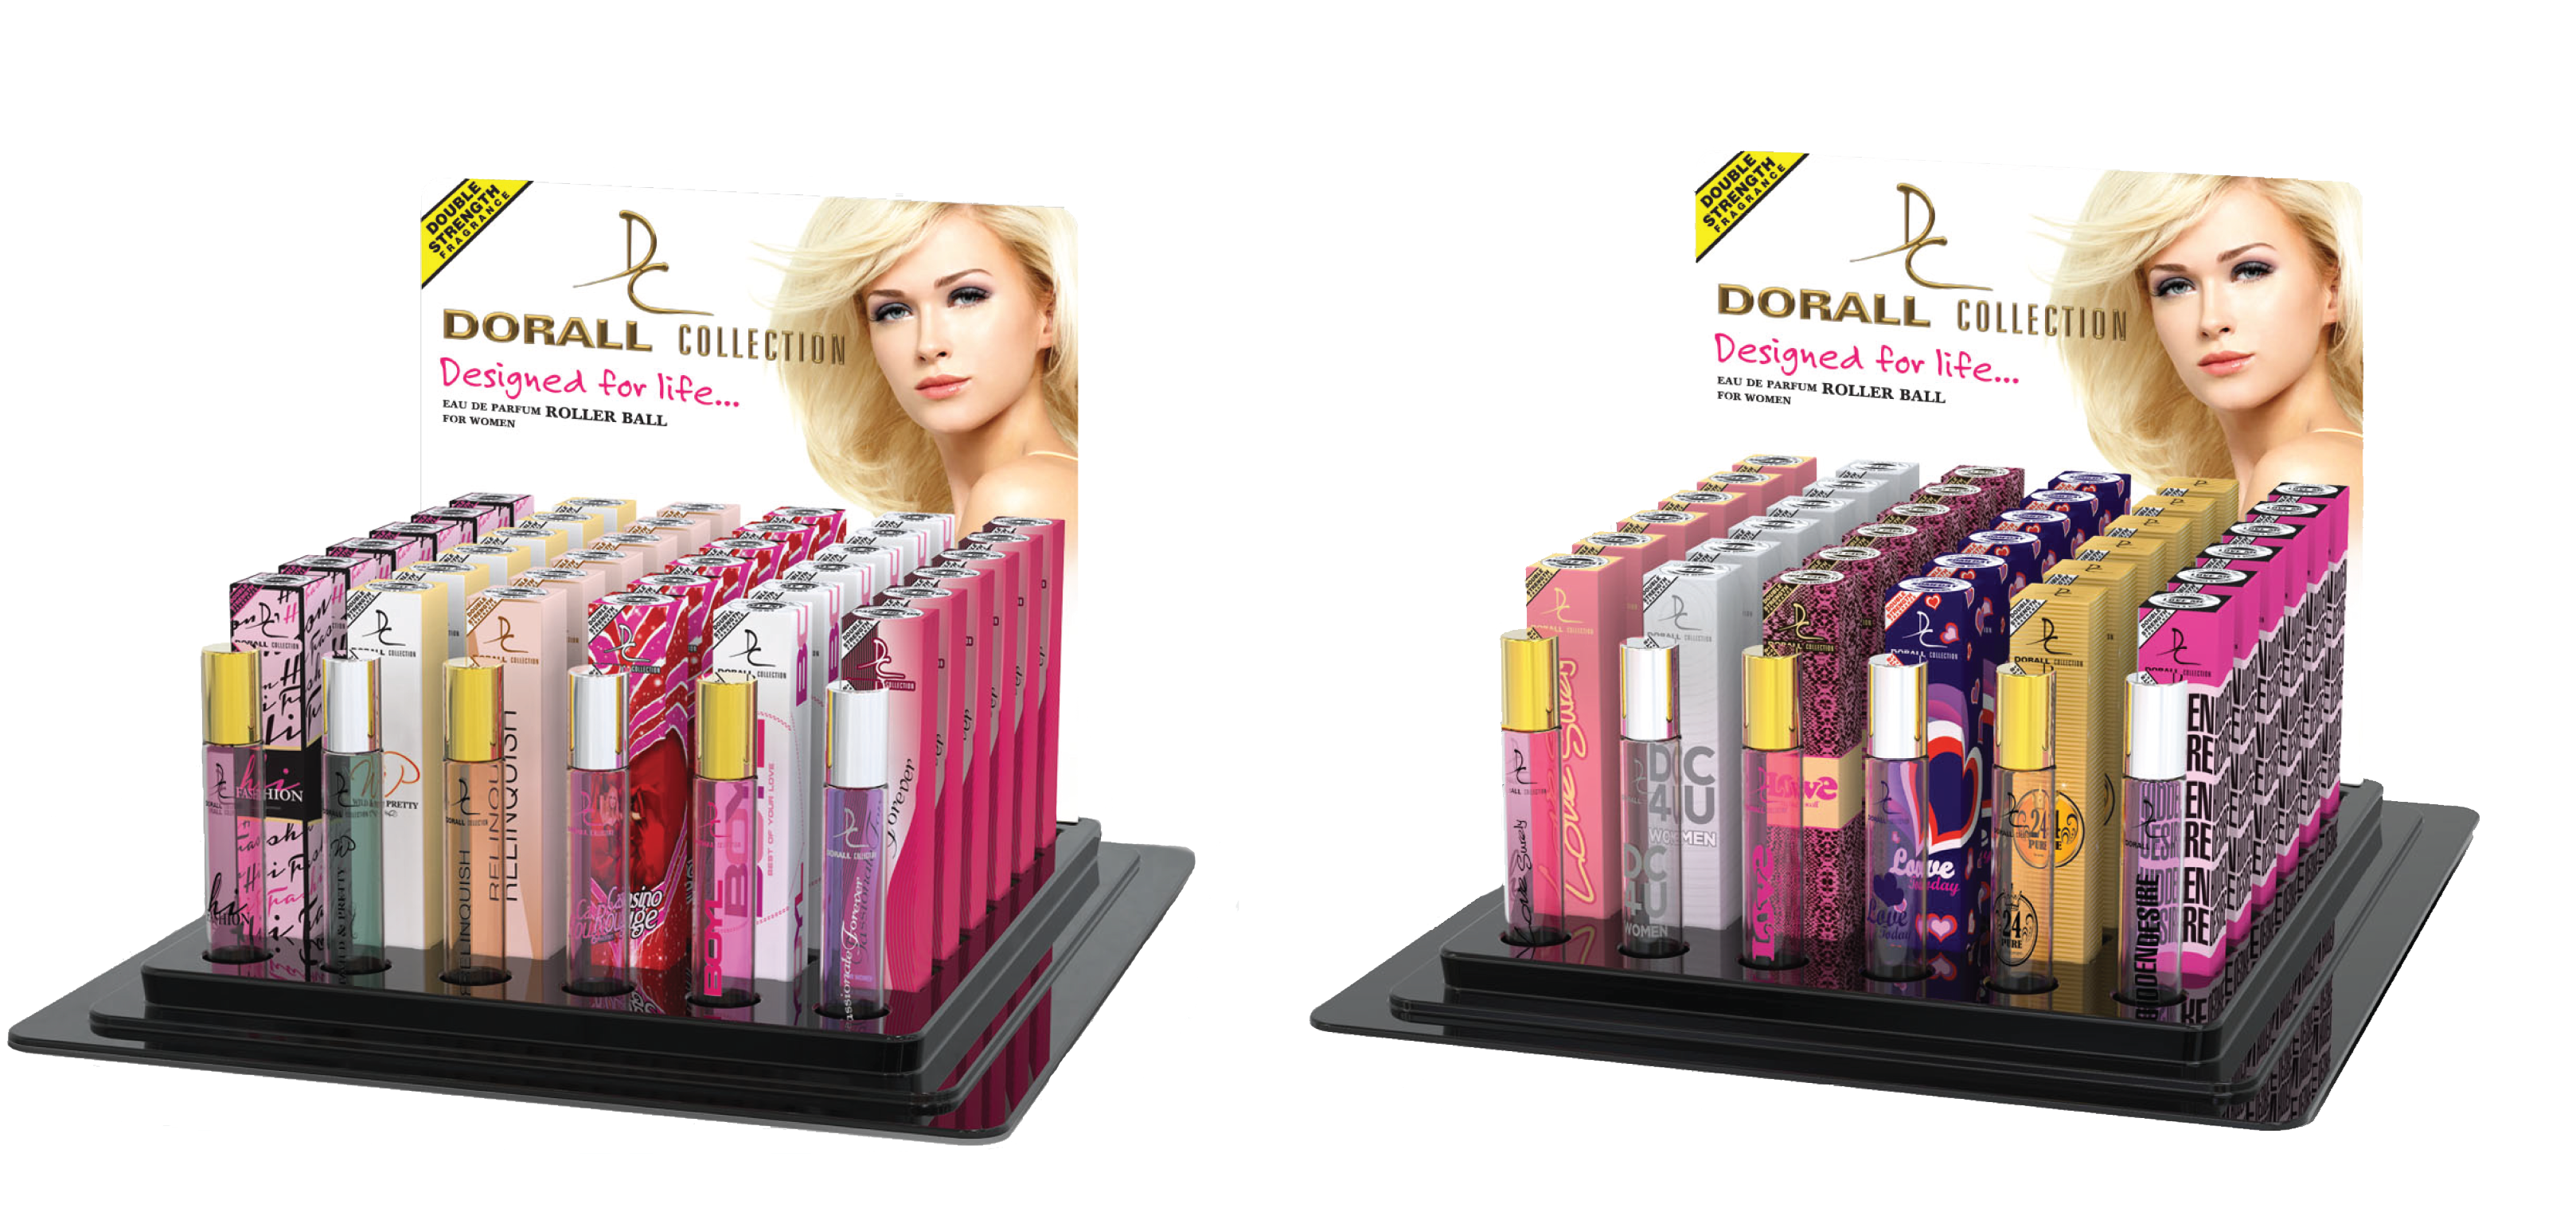 Dorall Collection Rollerballs 6x6 Display Trays by Arion Perfume & Beauty Inc.